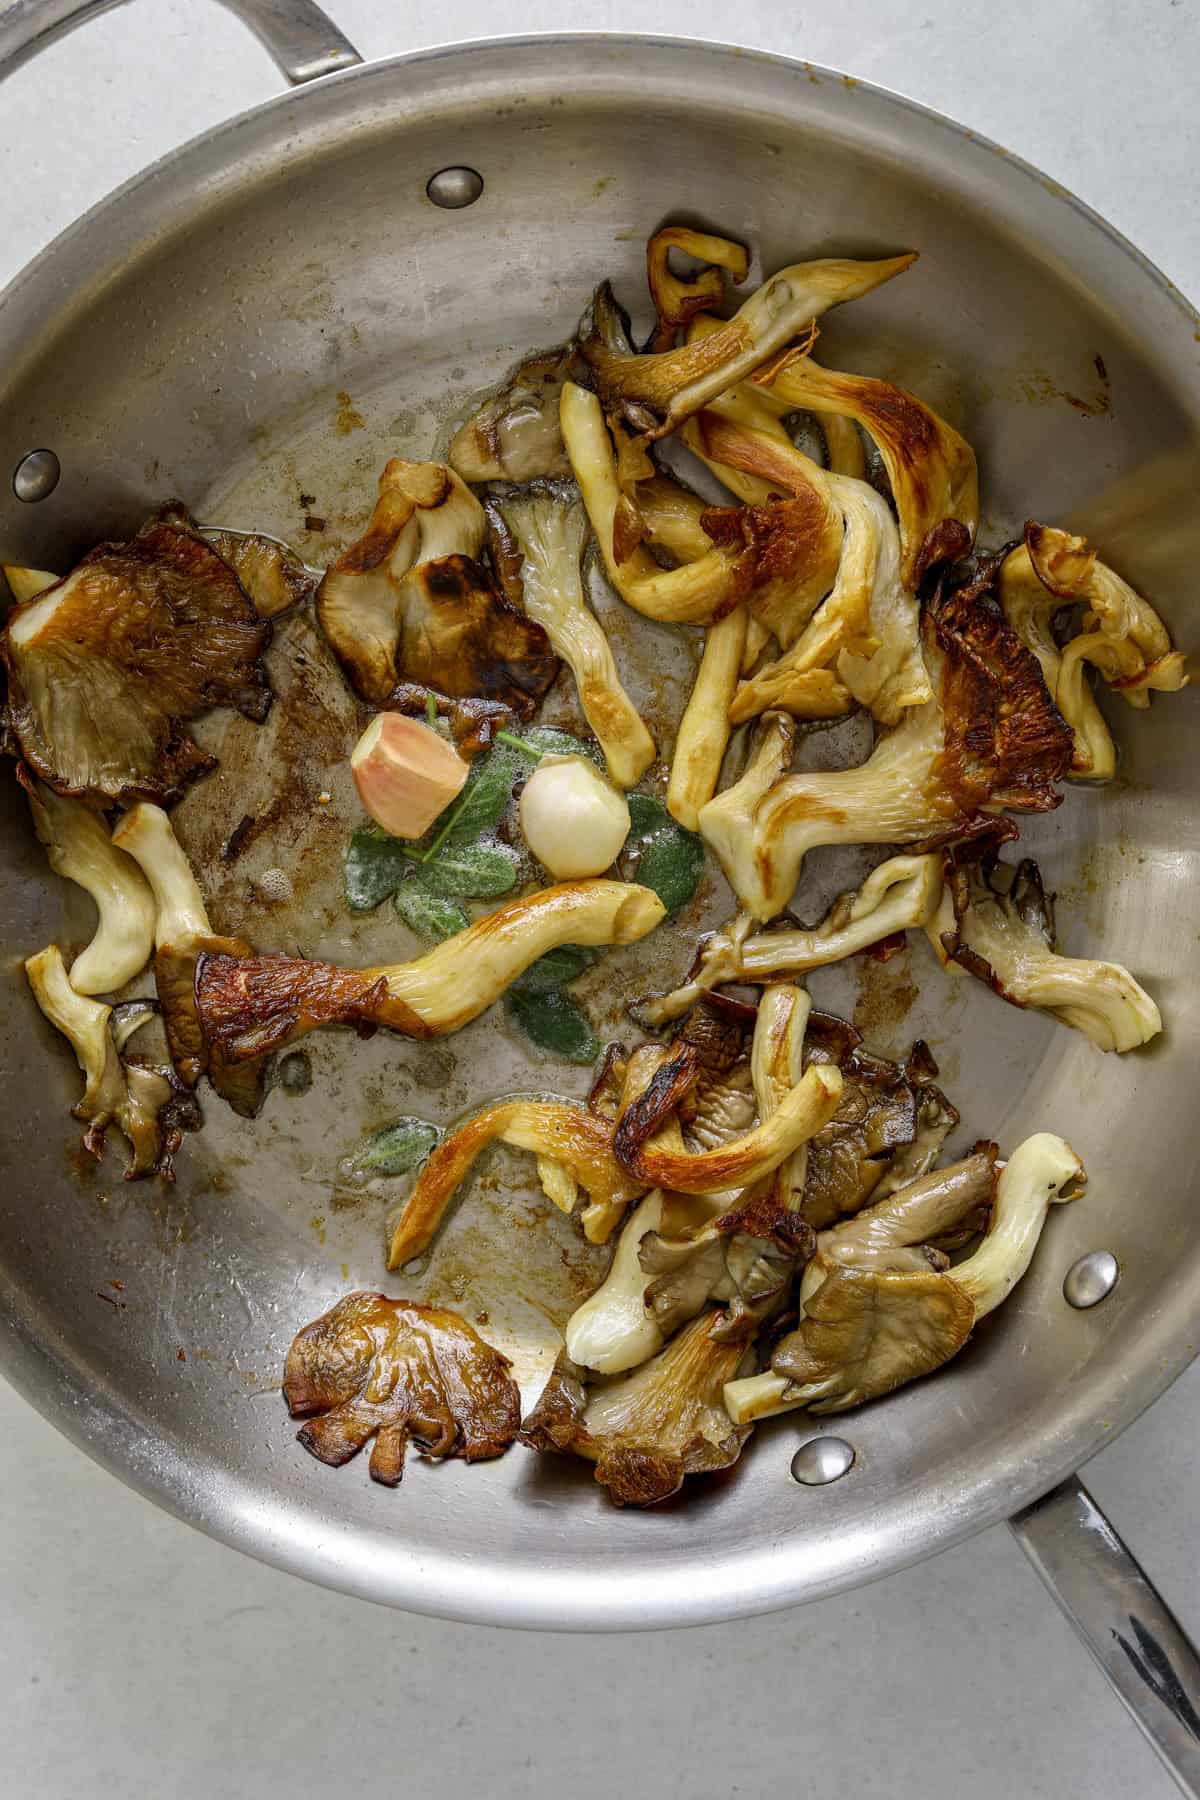 A stainless steel sauté pan filled with mushrooms, garlic cloves and sage leaves.